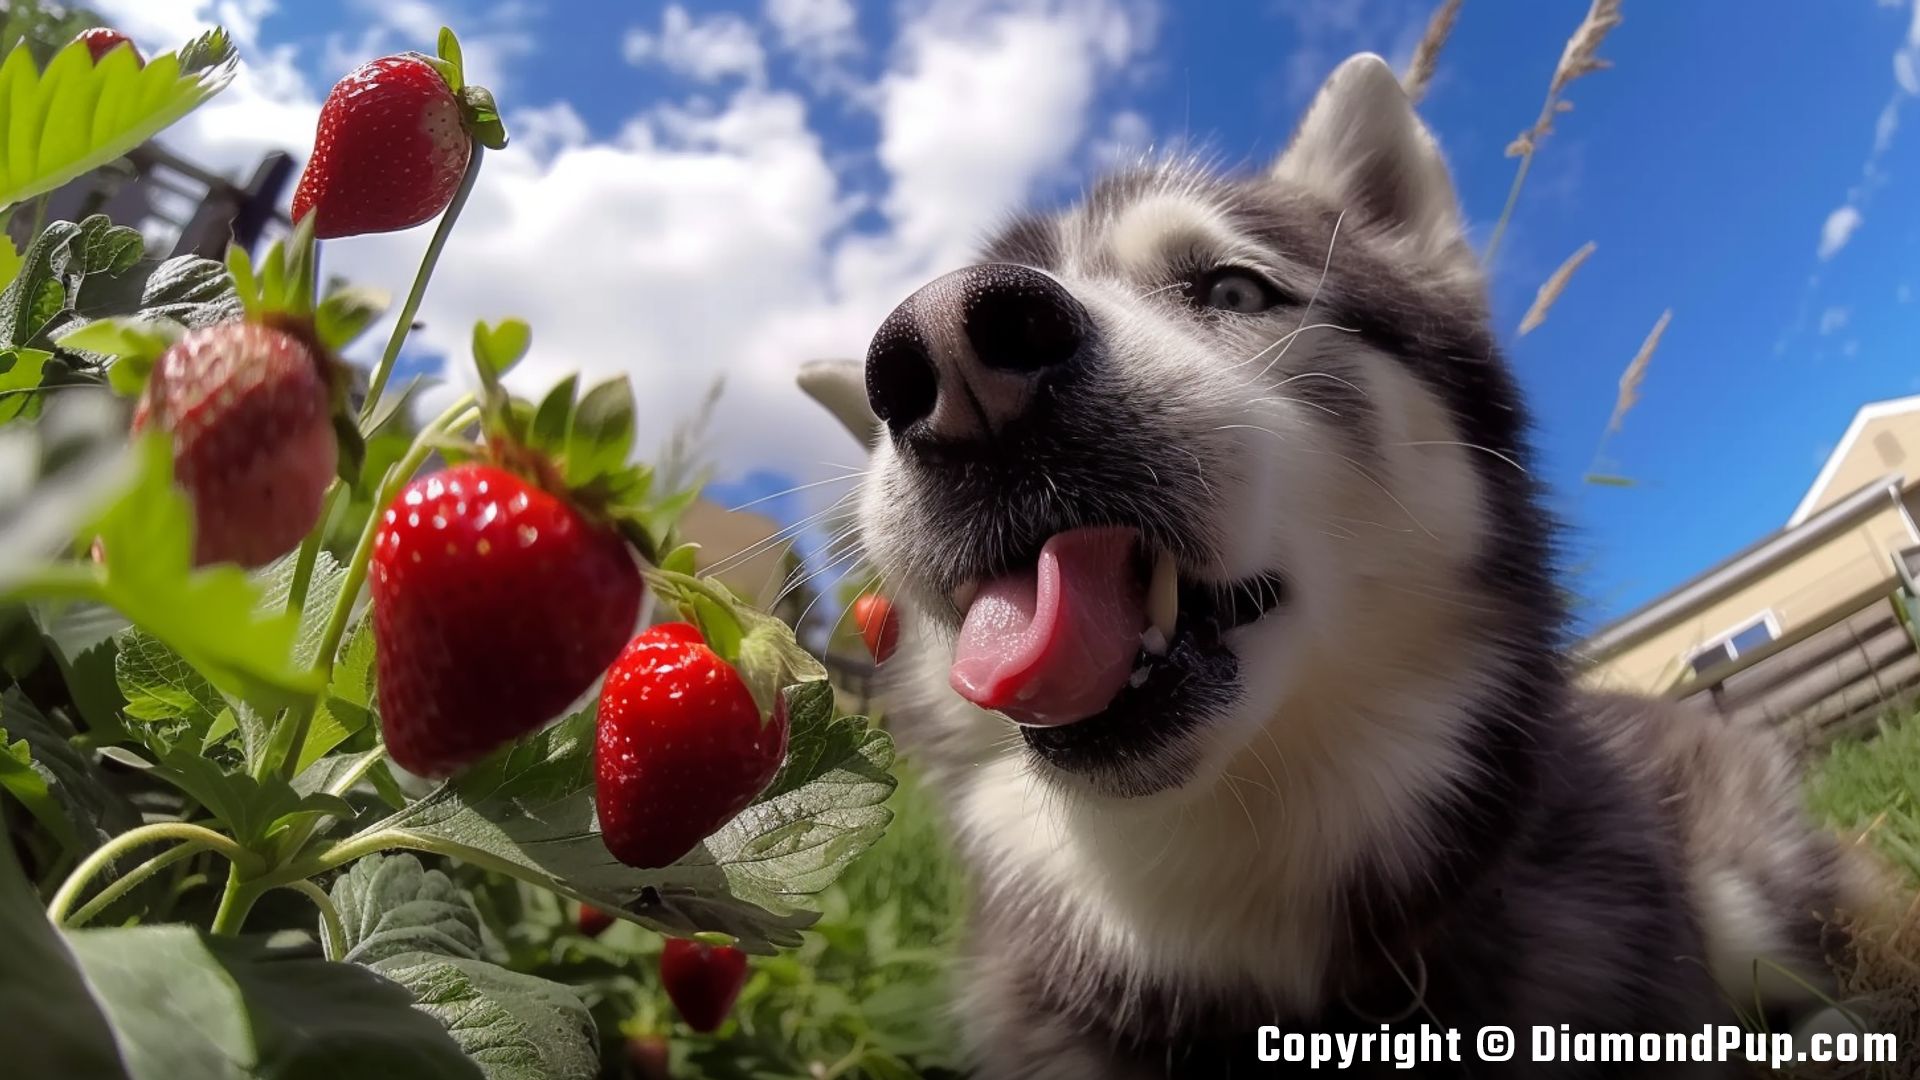 Photograph of Husky Snacking on Strawberries